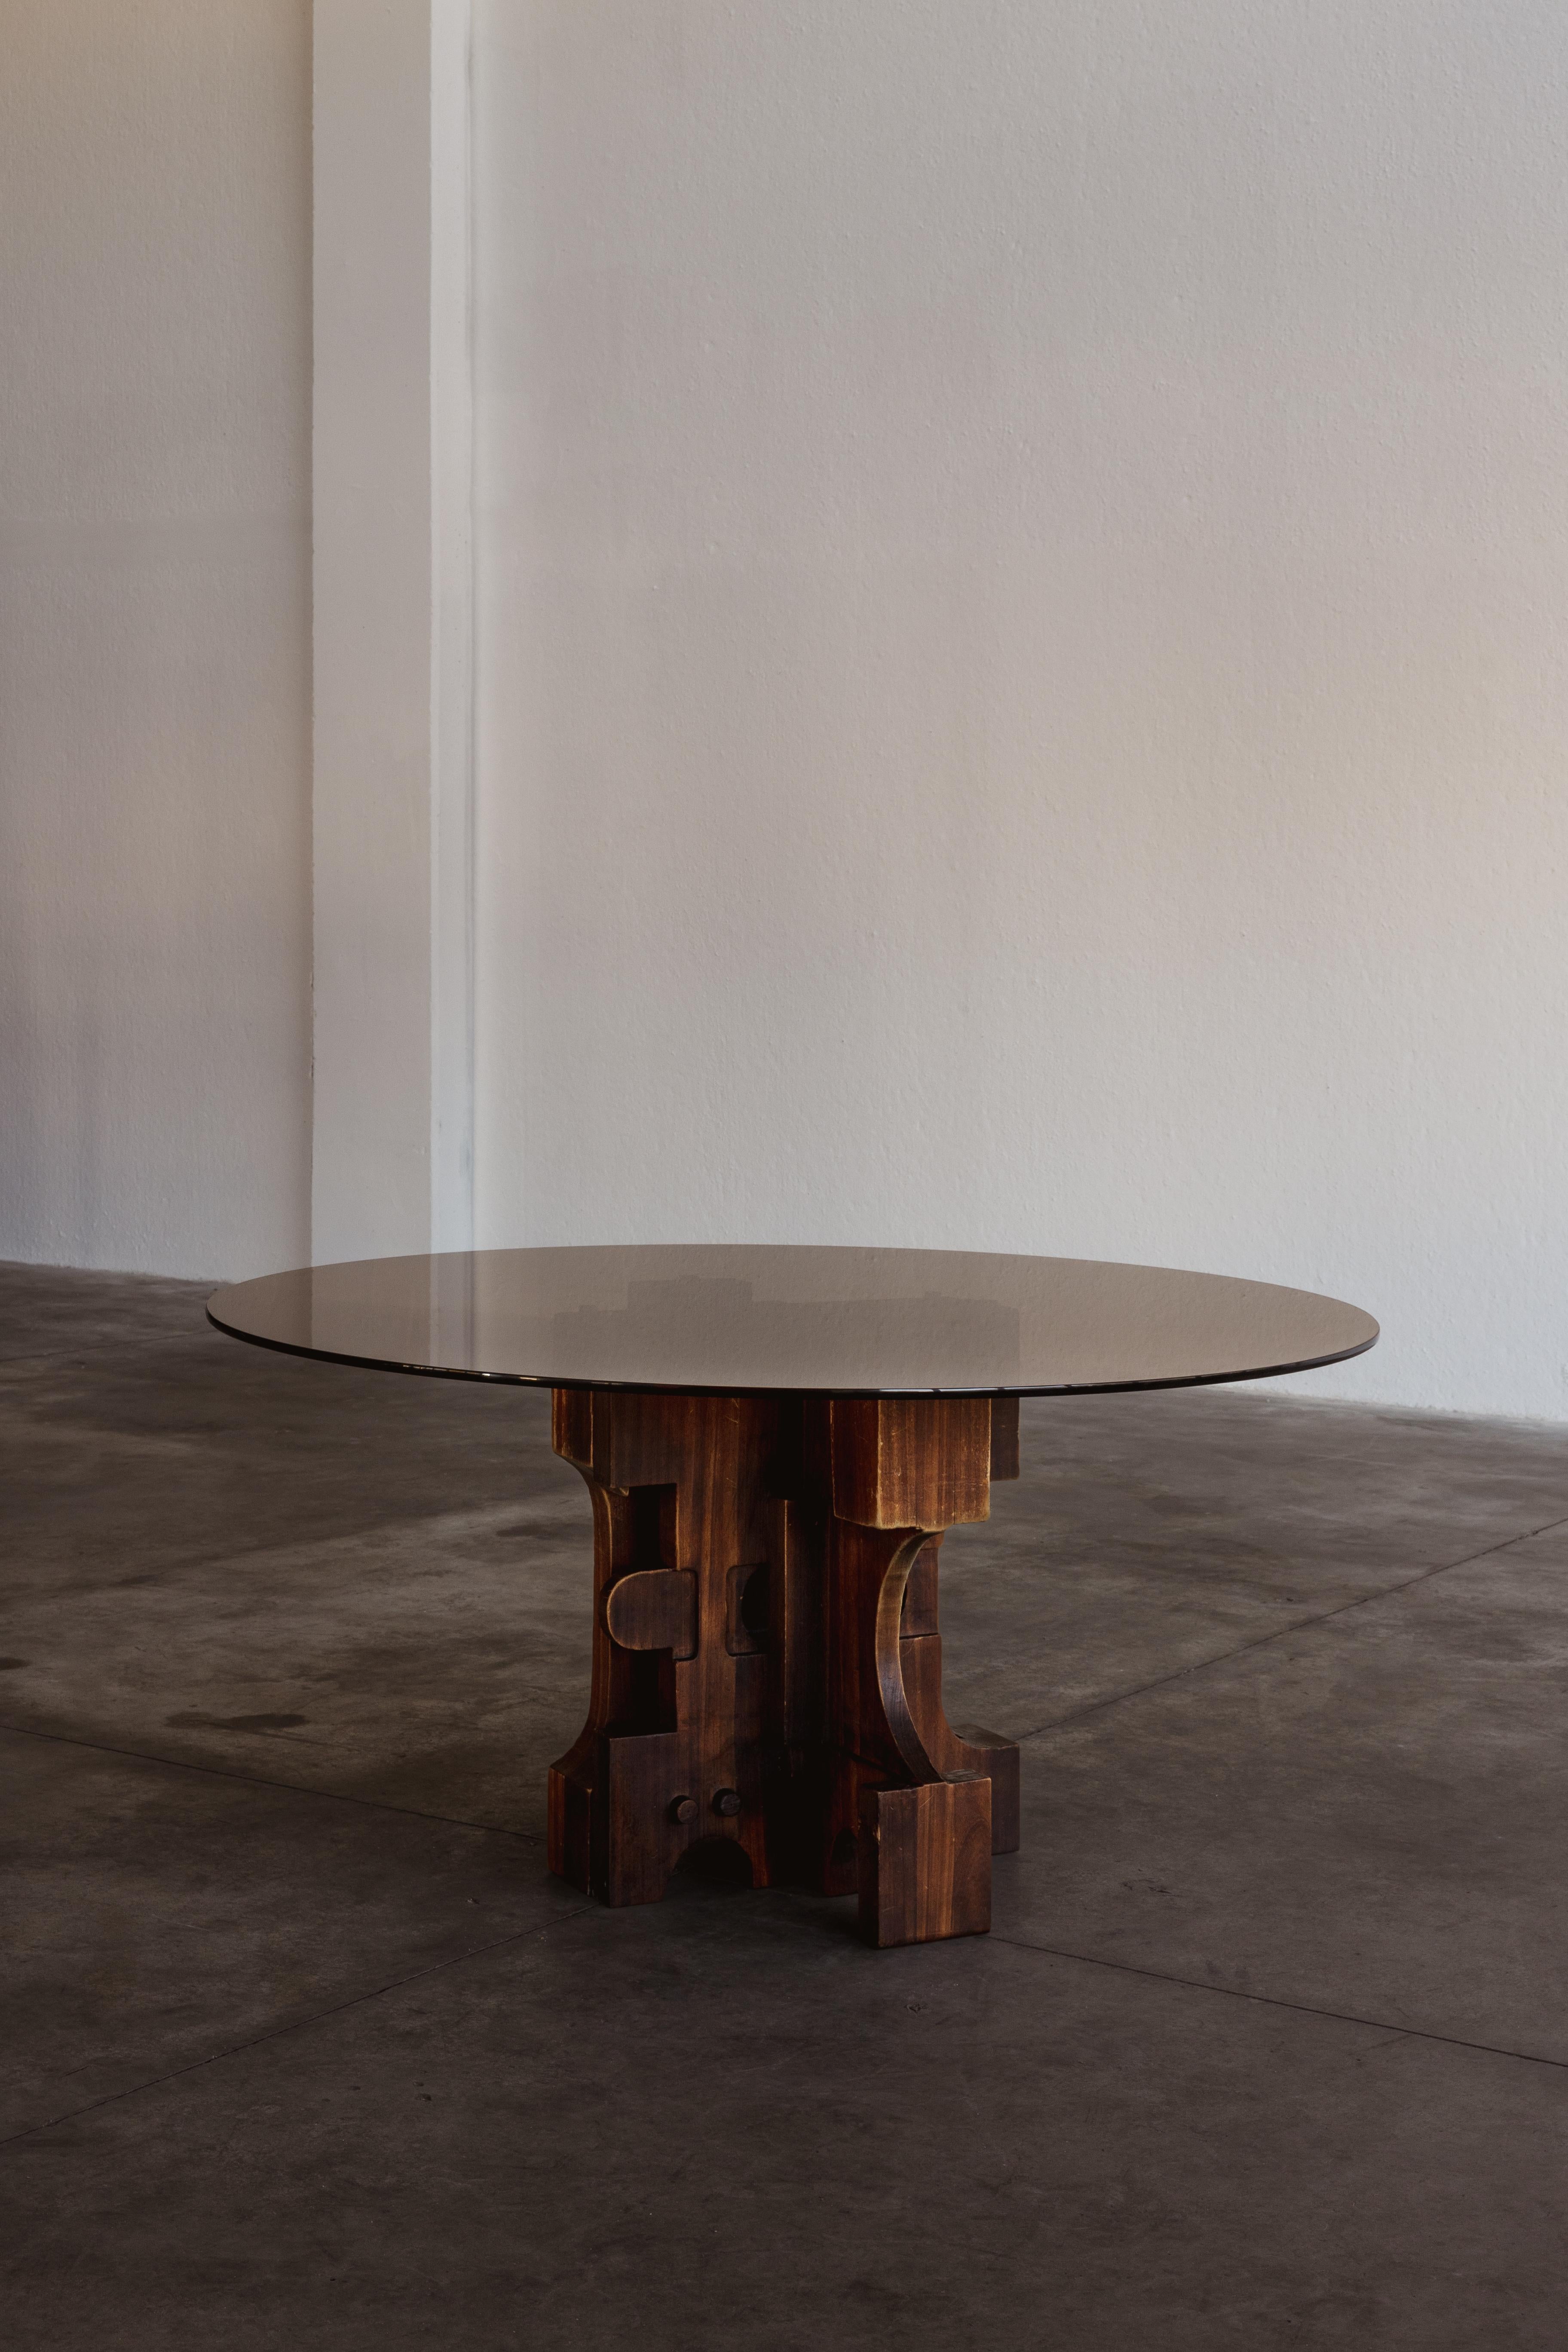 Nerone & Patuzzi dining table for Gruppo NP2, glass, iron and wood, Italy, 1970s.

Designed by the Italian duo Nerone and Patuzzi, this dining table is a work of art. The base consists of an asymmetrical layout of geometric elements that vary in